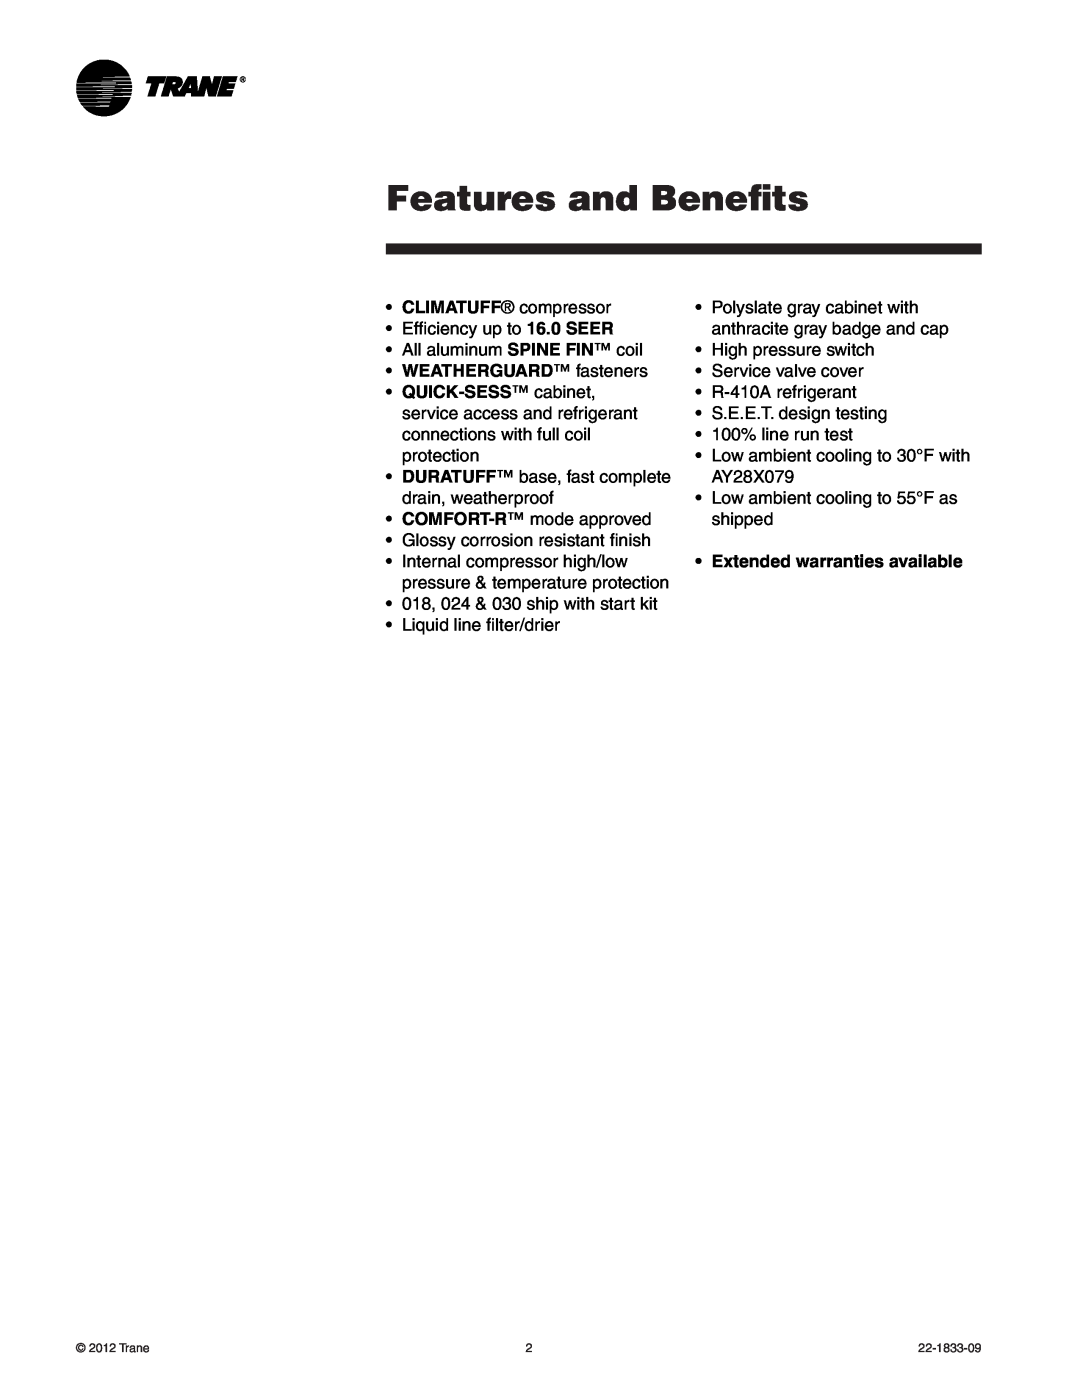 Trane 4TTB4 manual Features and Benefits, WEATHERGUARD fasteners, Extended warranties available 